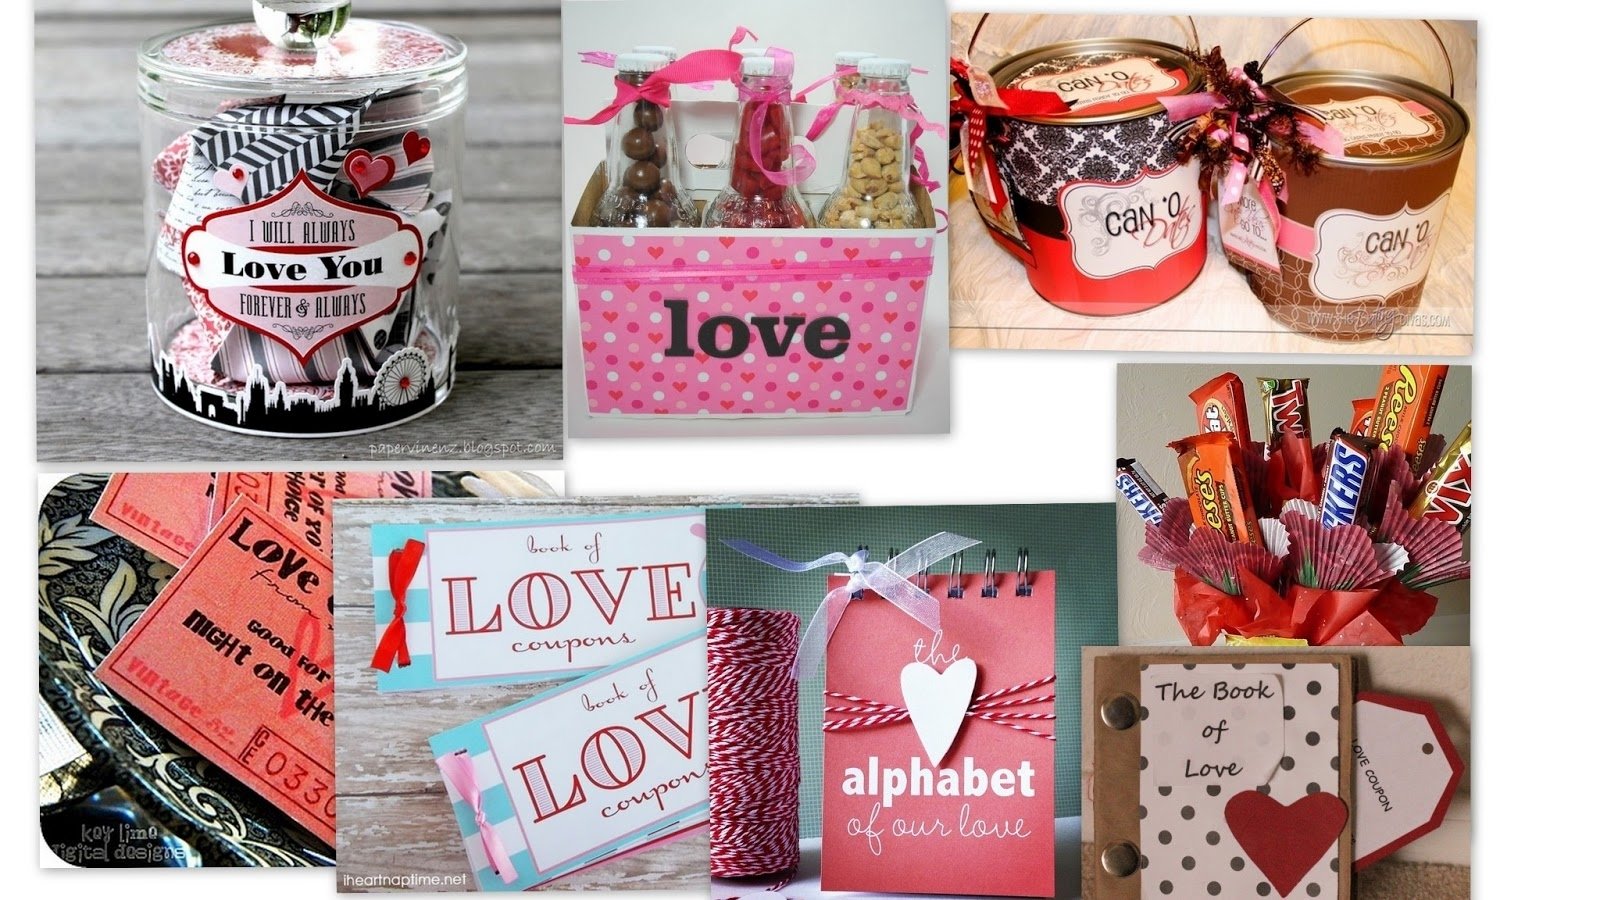 10 Stunning Homemade Valentines Gift Ideas For Him homemade valentines day gift ideas startupcorner co 2023